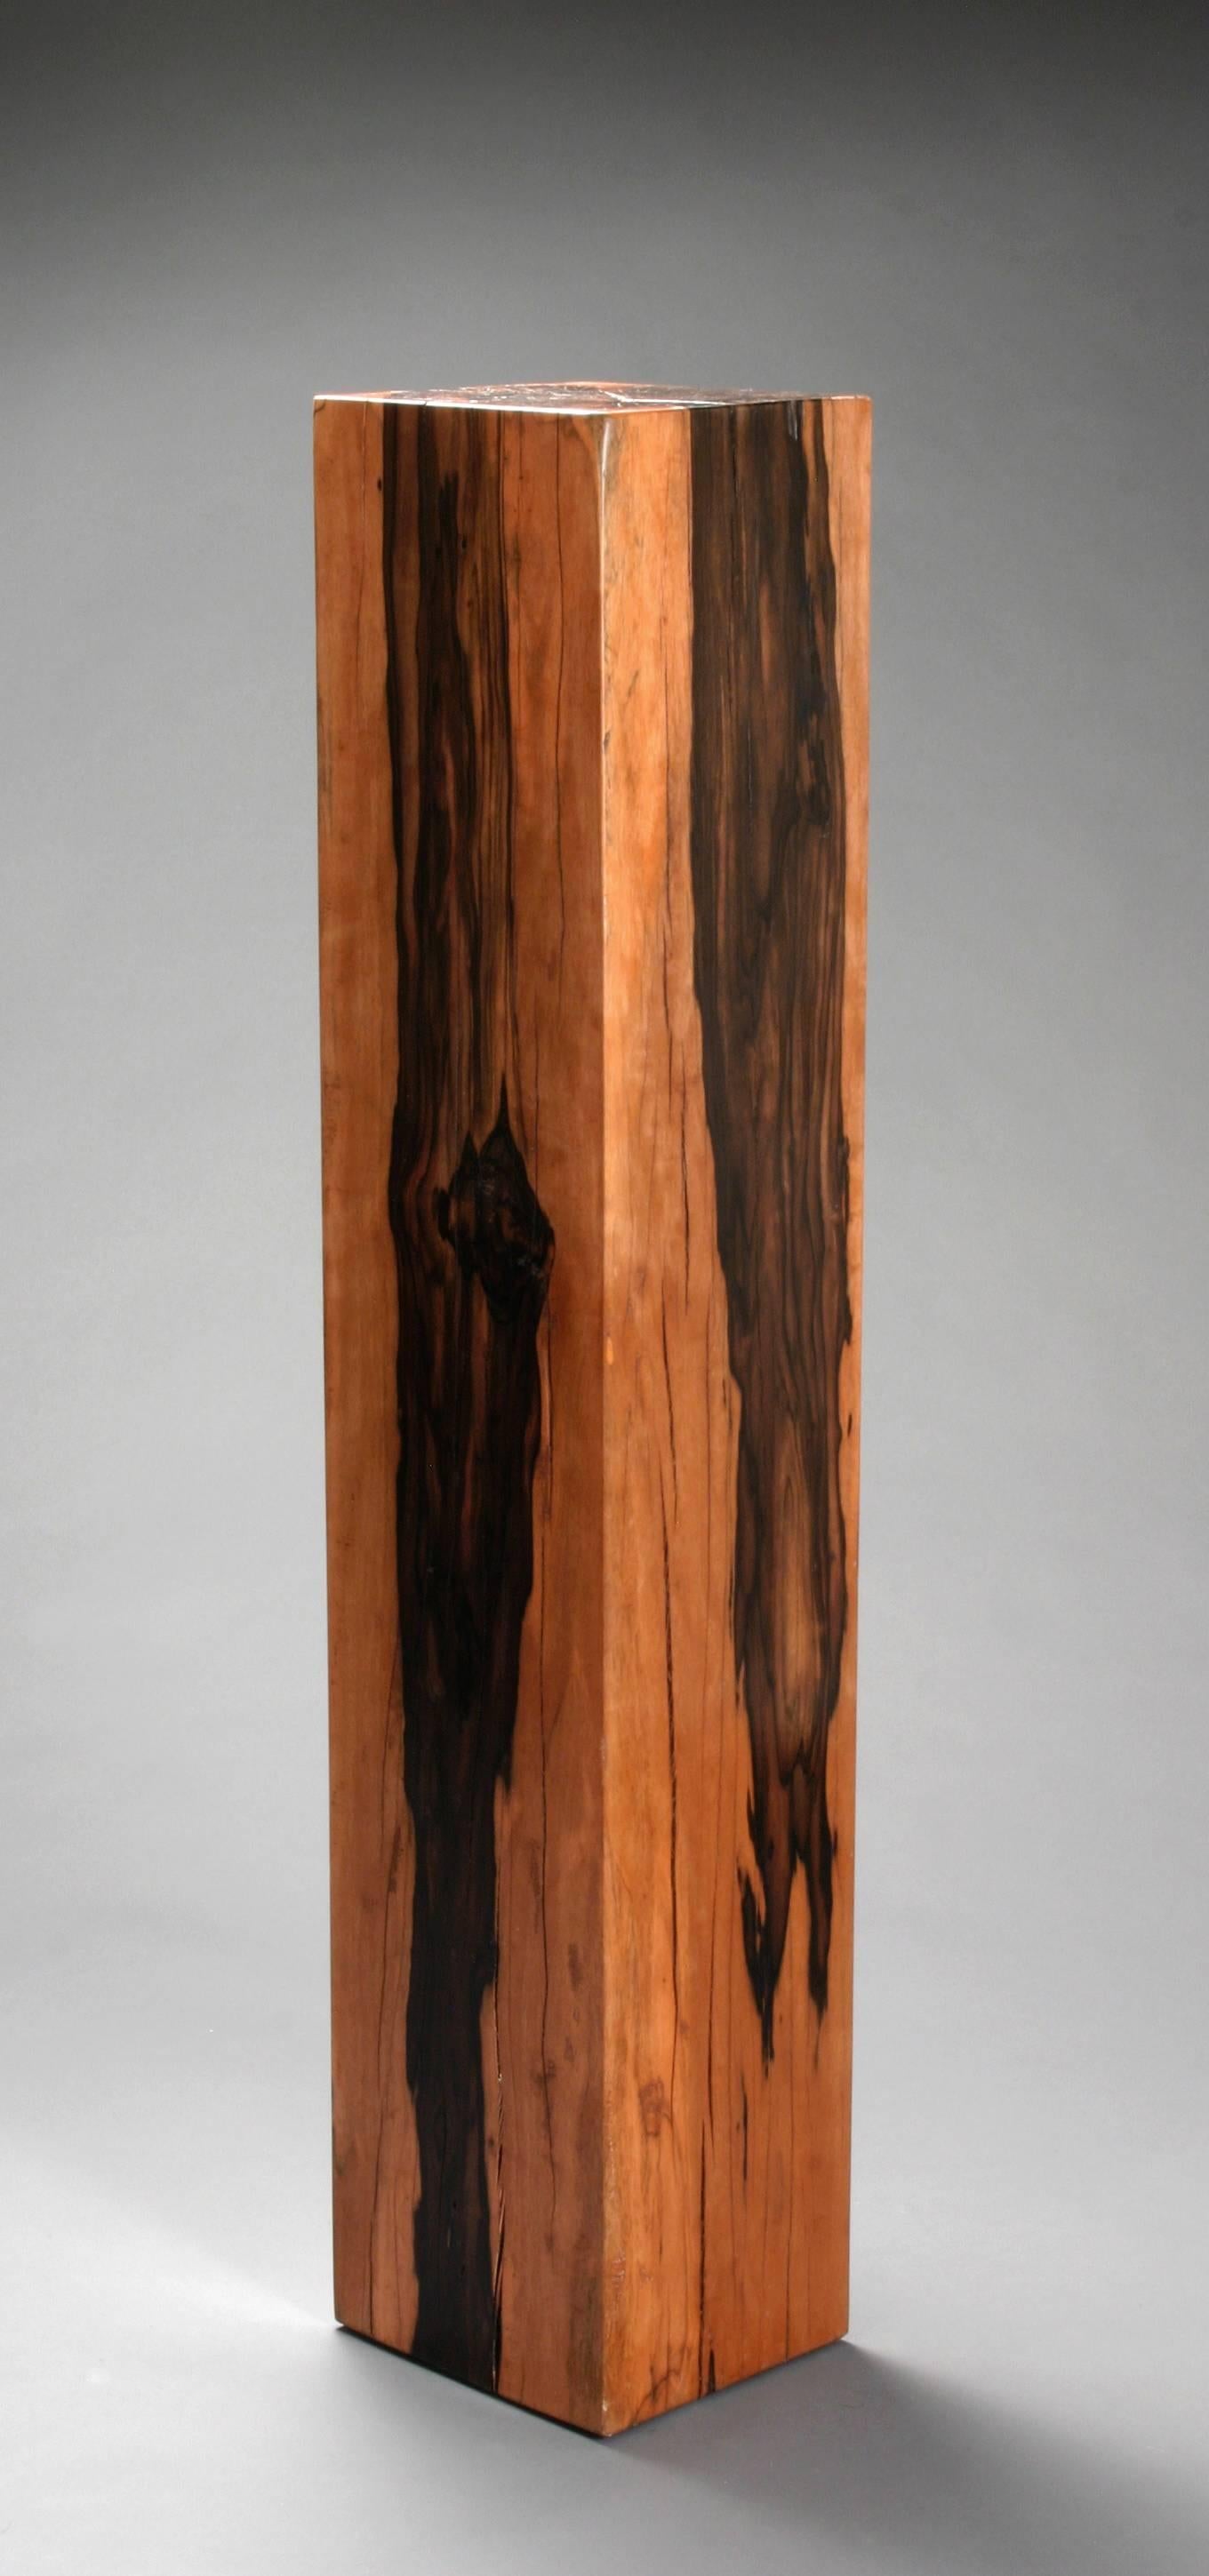 The square columnar form with typical robust variegated yellow and chocolate color. Macassar, the most colorful ebony, is easily identified by its dramatic pattern, its density and its ability to take on a lustrous finish.  